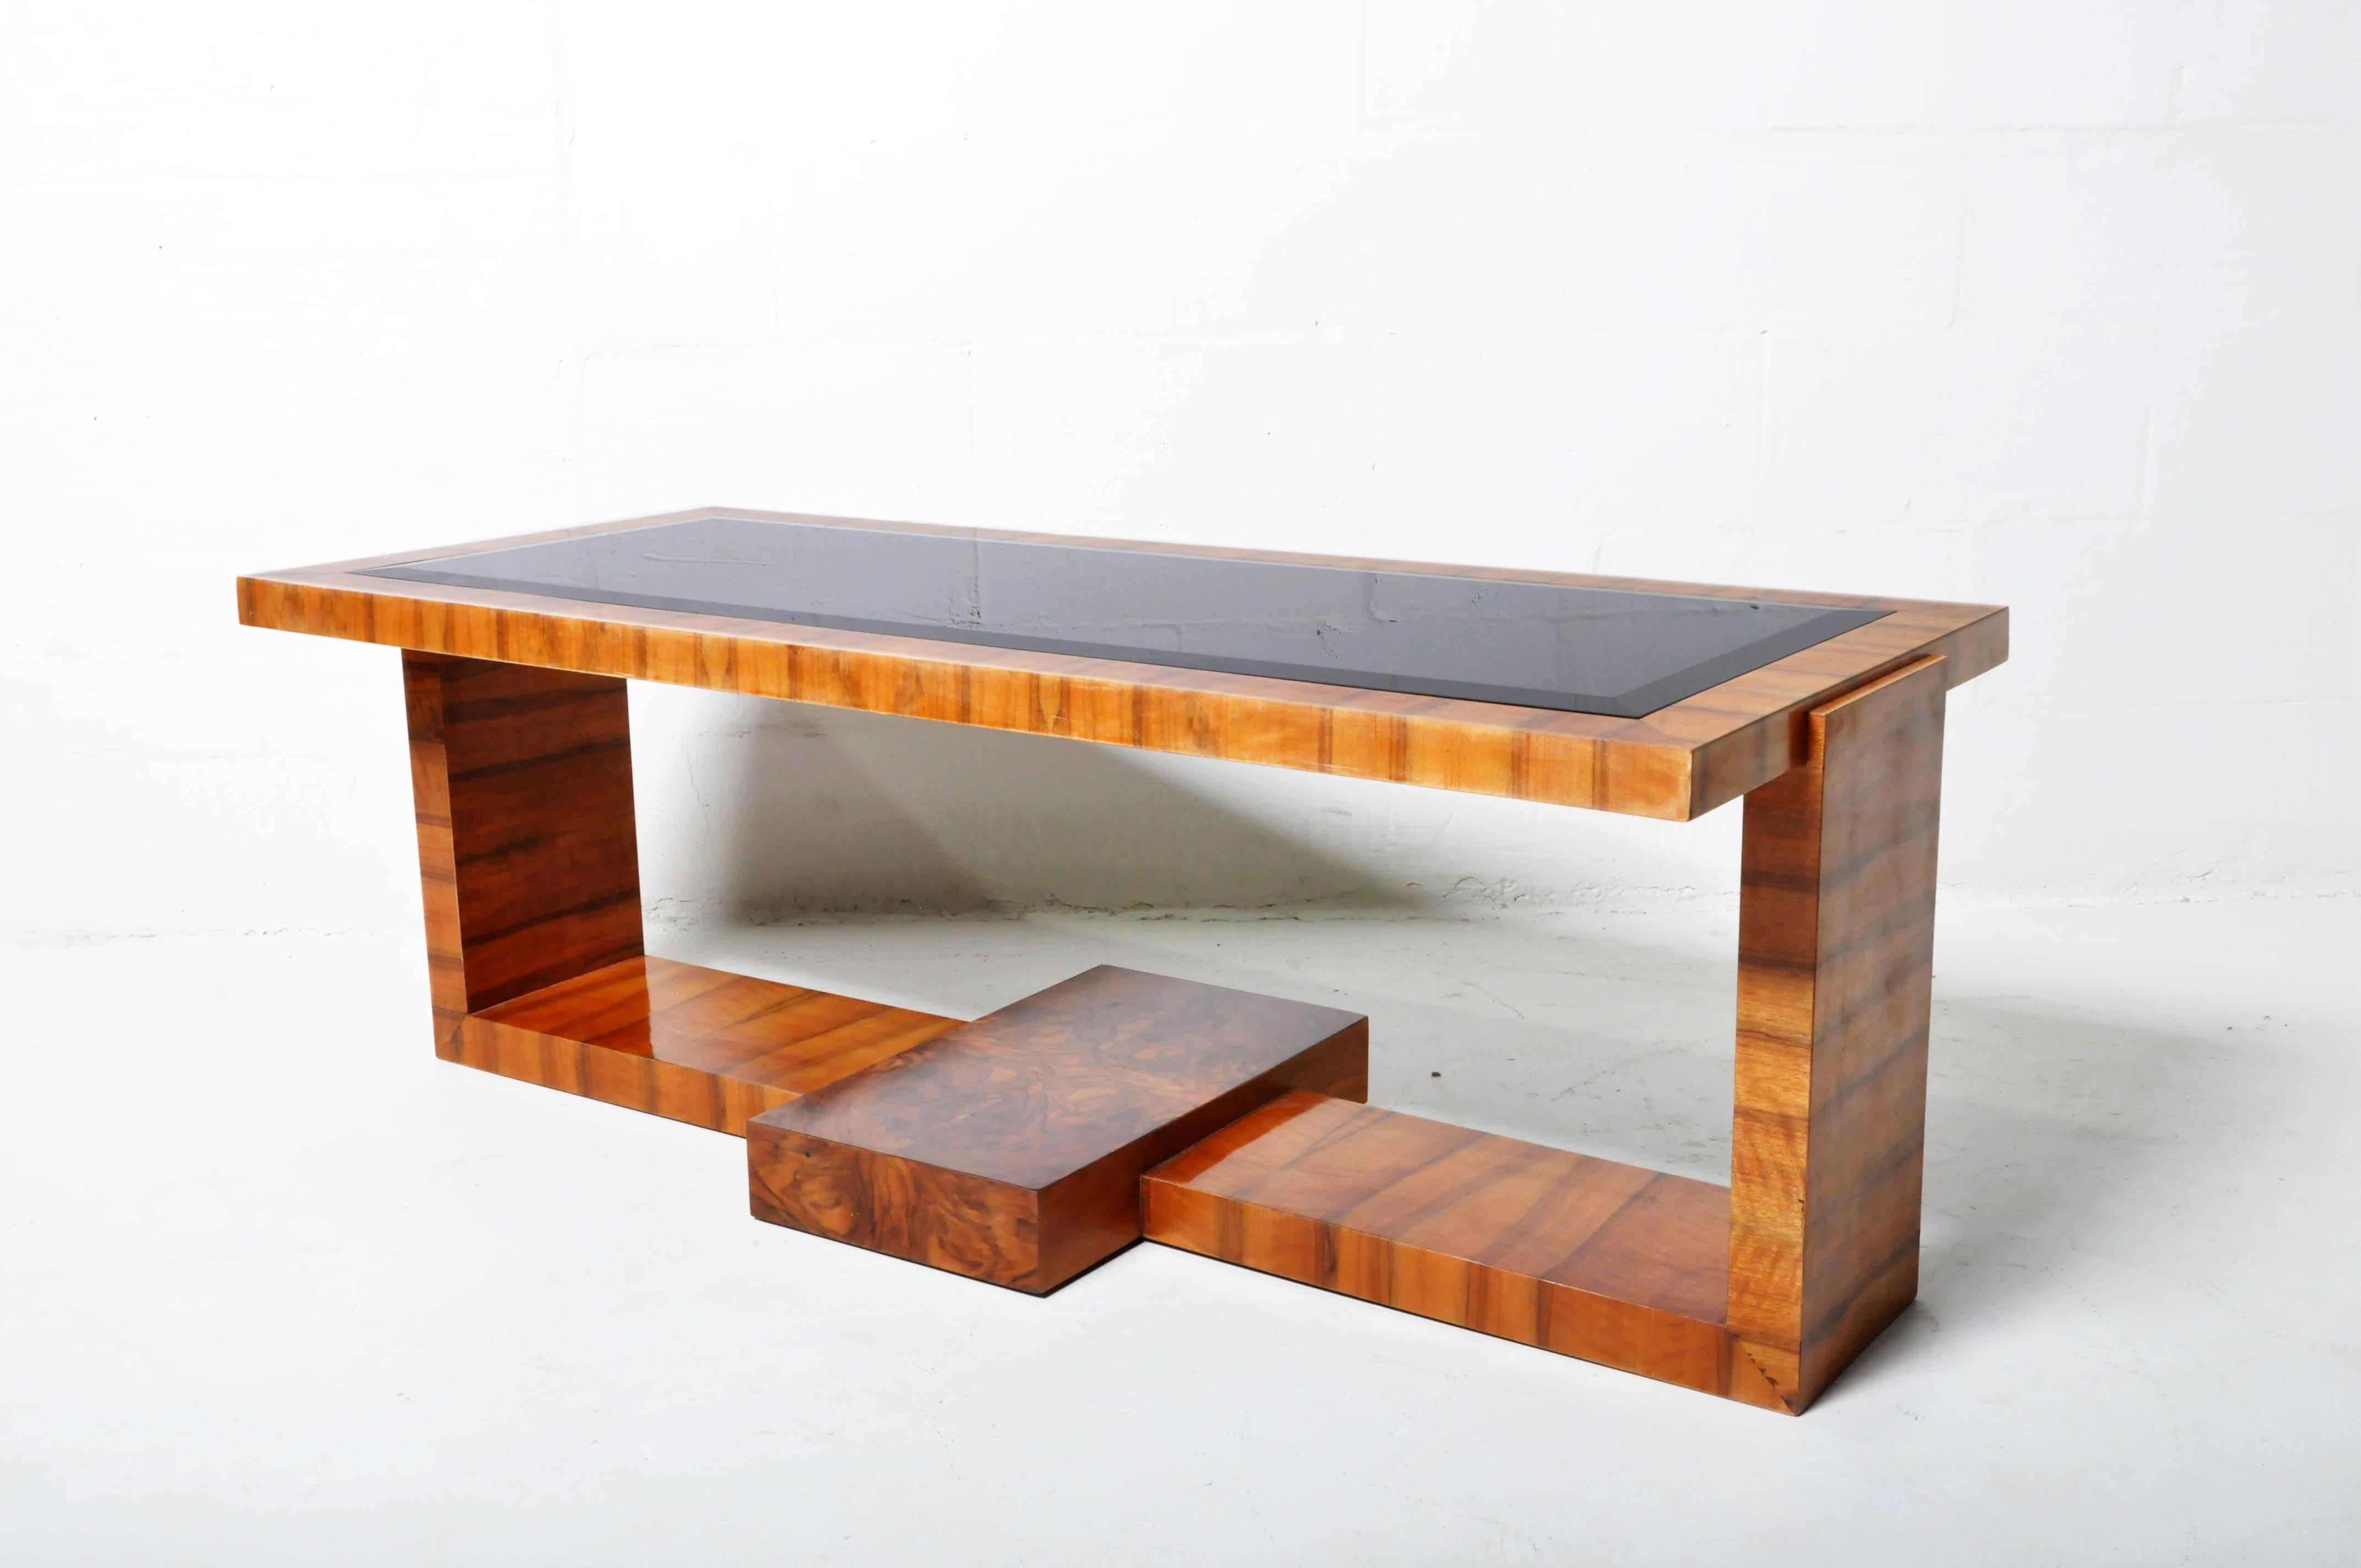 Lacquered Coffee Table with Walnut Veneer and a Smoked Glass Top